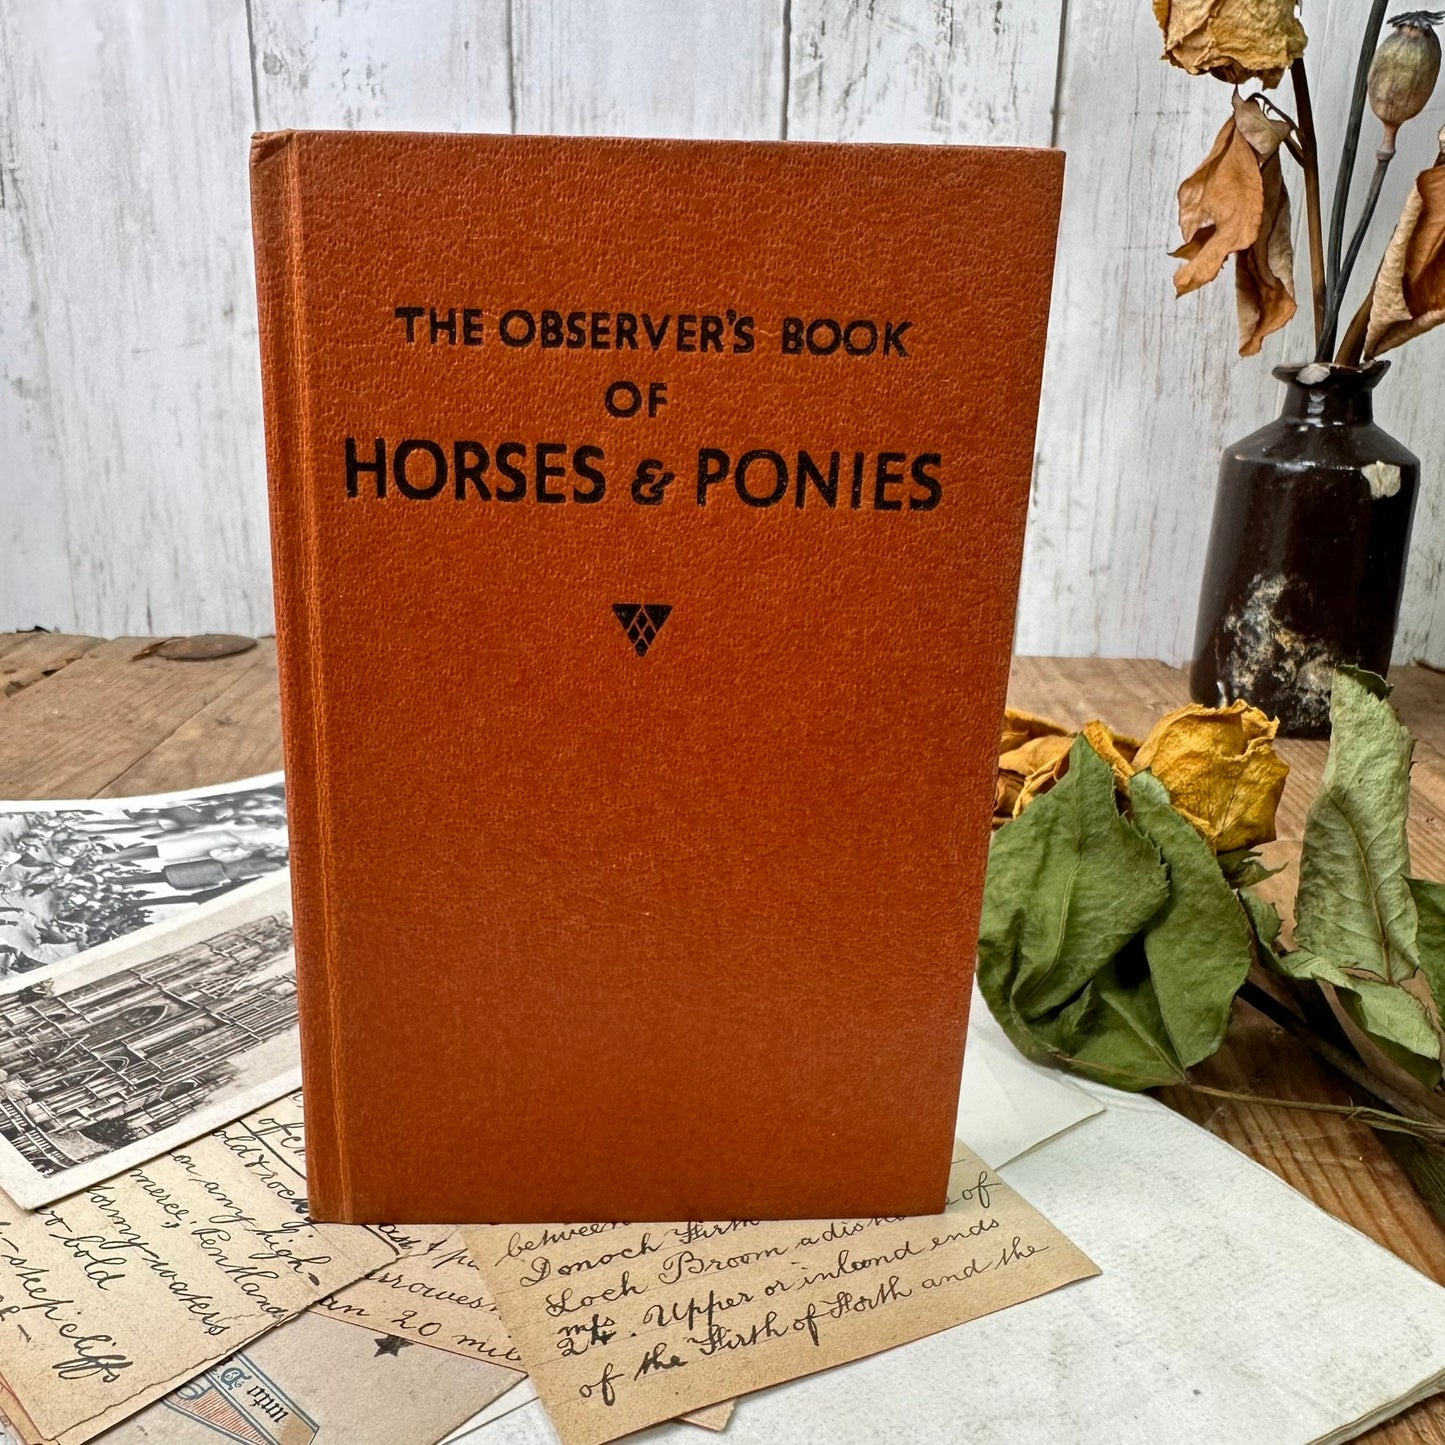 The observer’s book of Horses & Ponies Top - Bottom